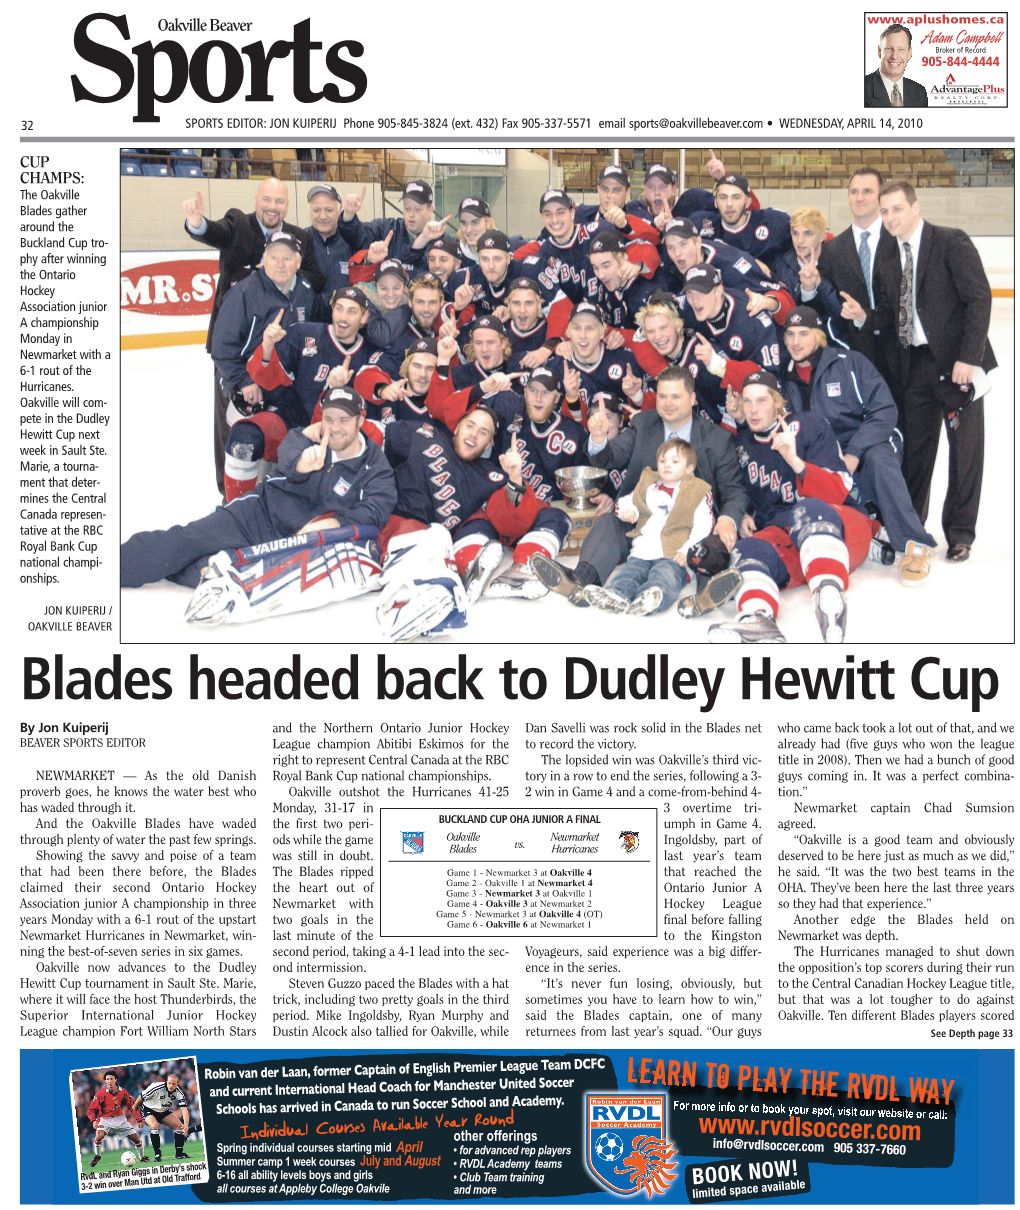 Blades Headed Back to Dudley Hewitt